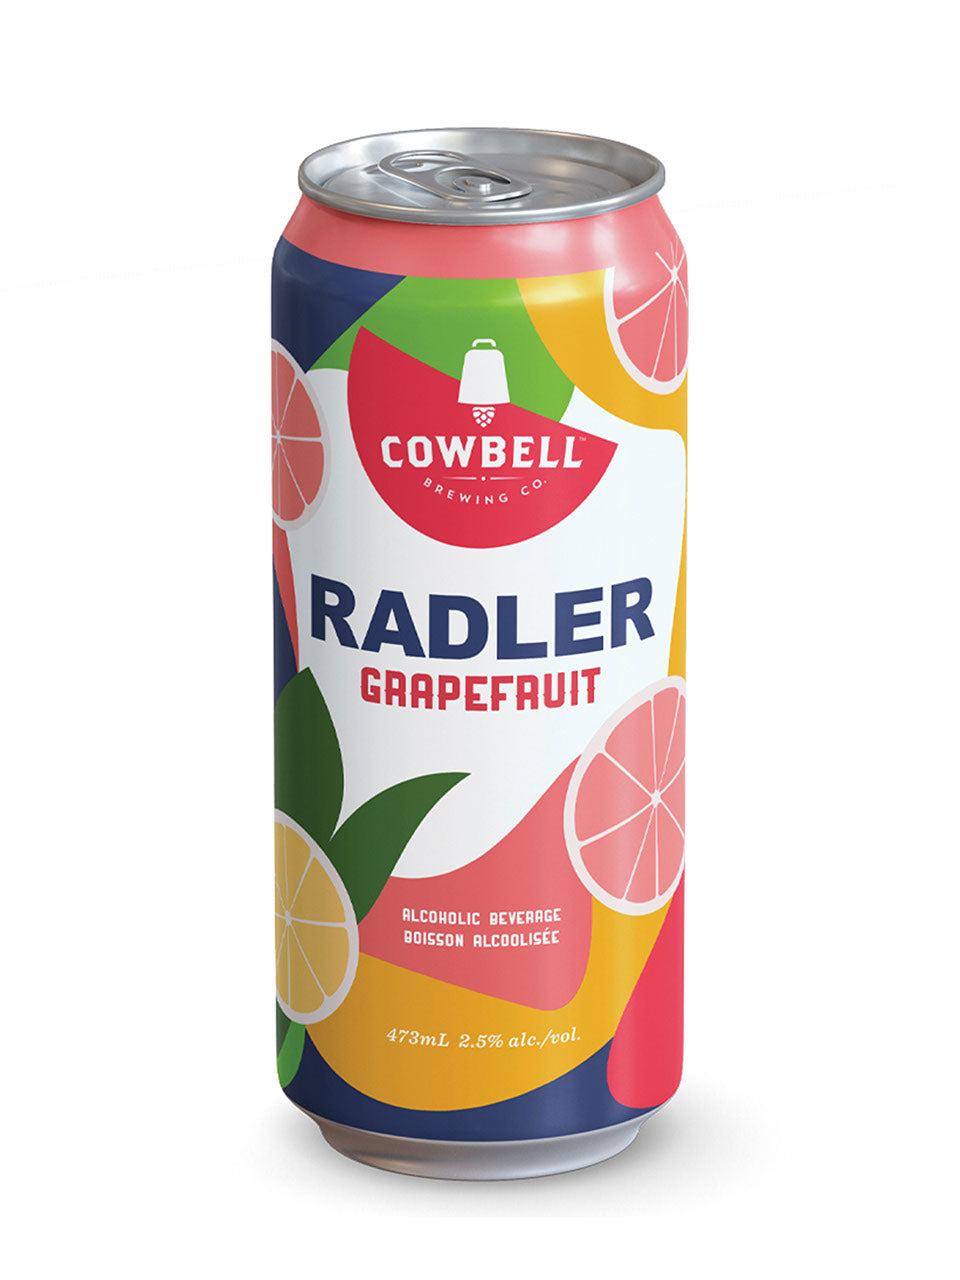 Cowbell Brewing Co. Grapefruit Radler 473 ml can